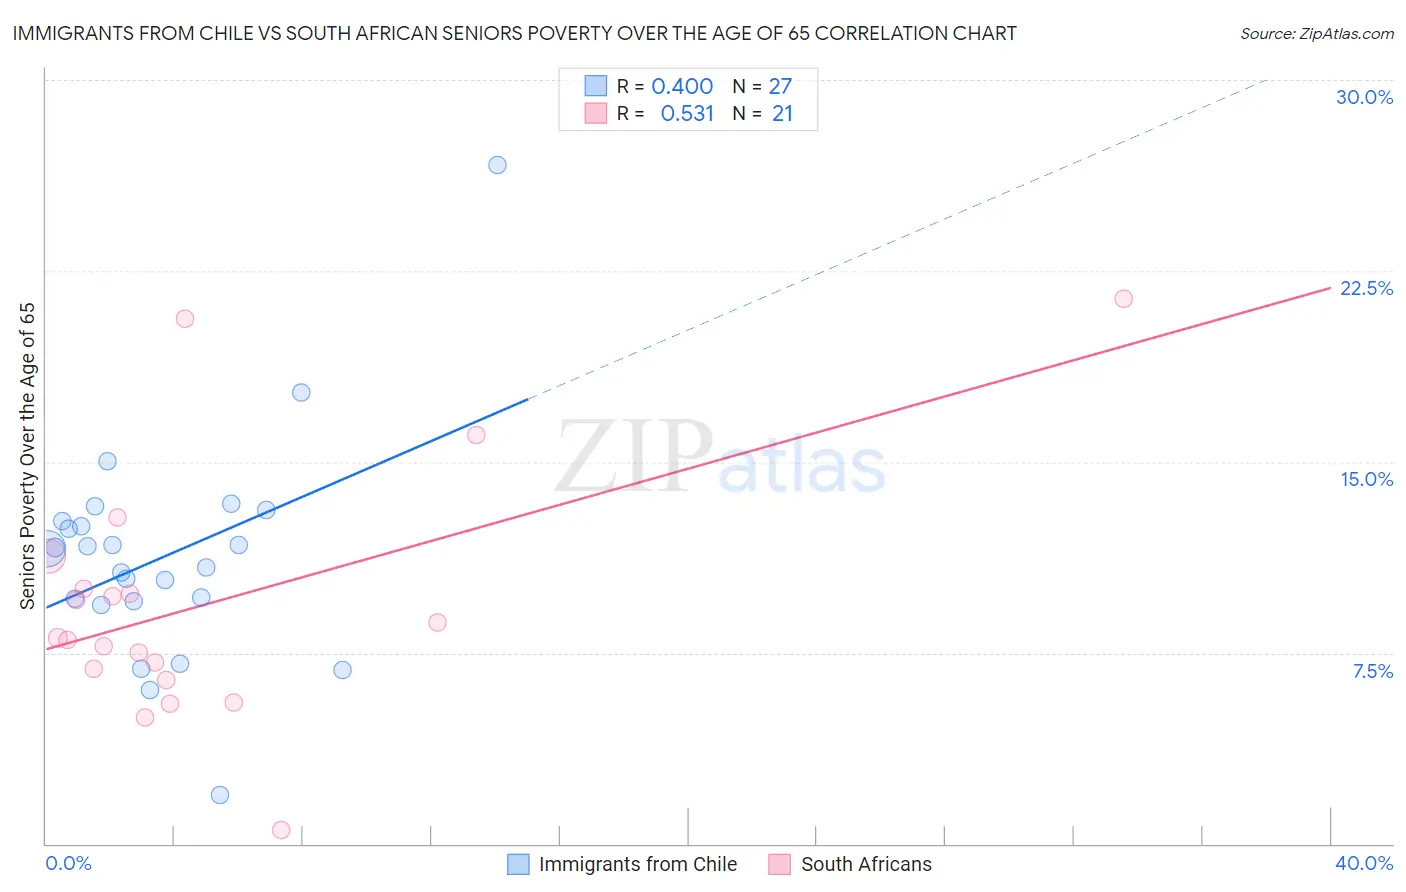 Immigrants from Chile vs South African Seniors Poverty Over the Age of 65